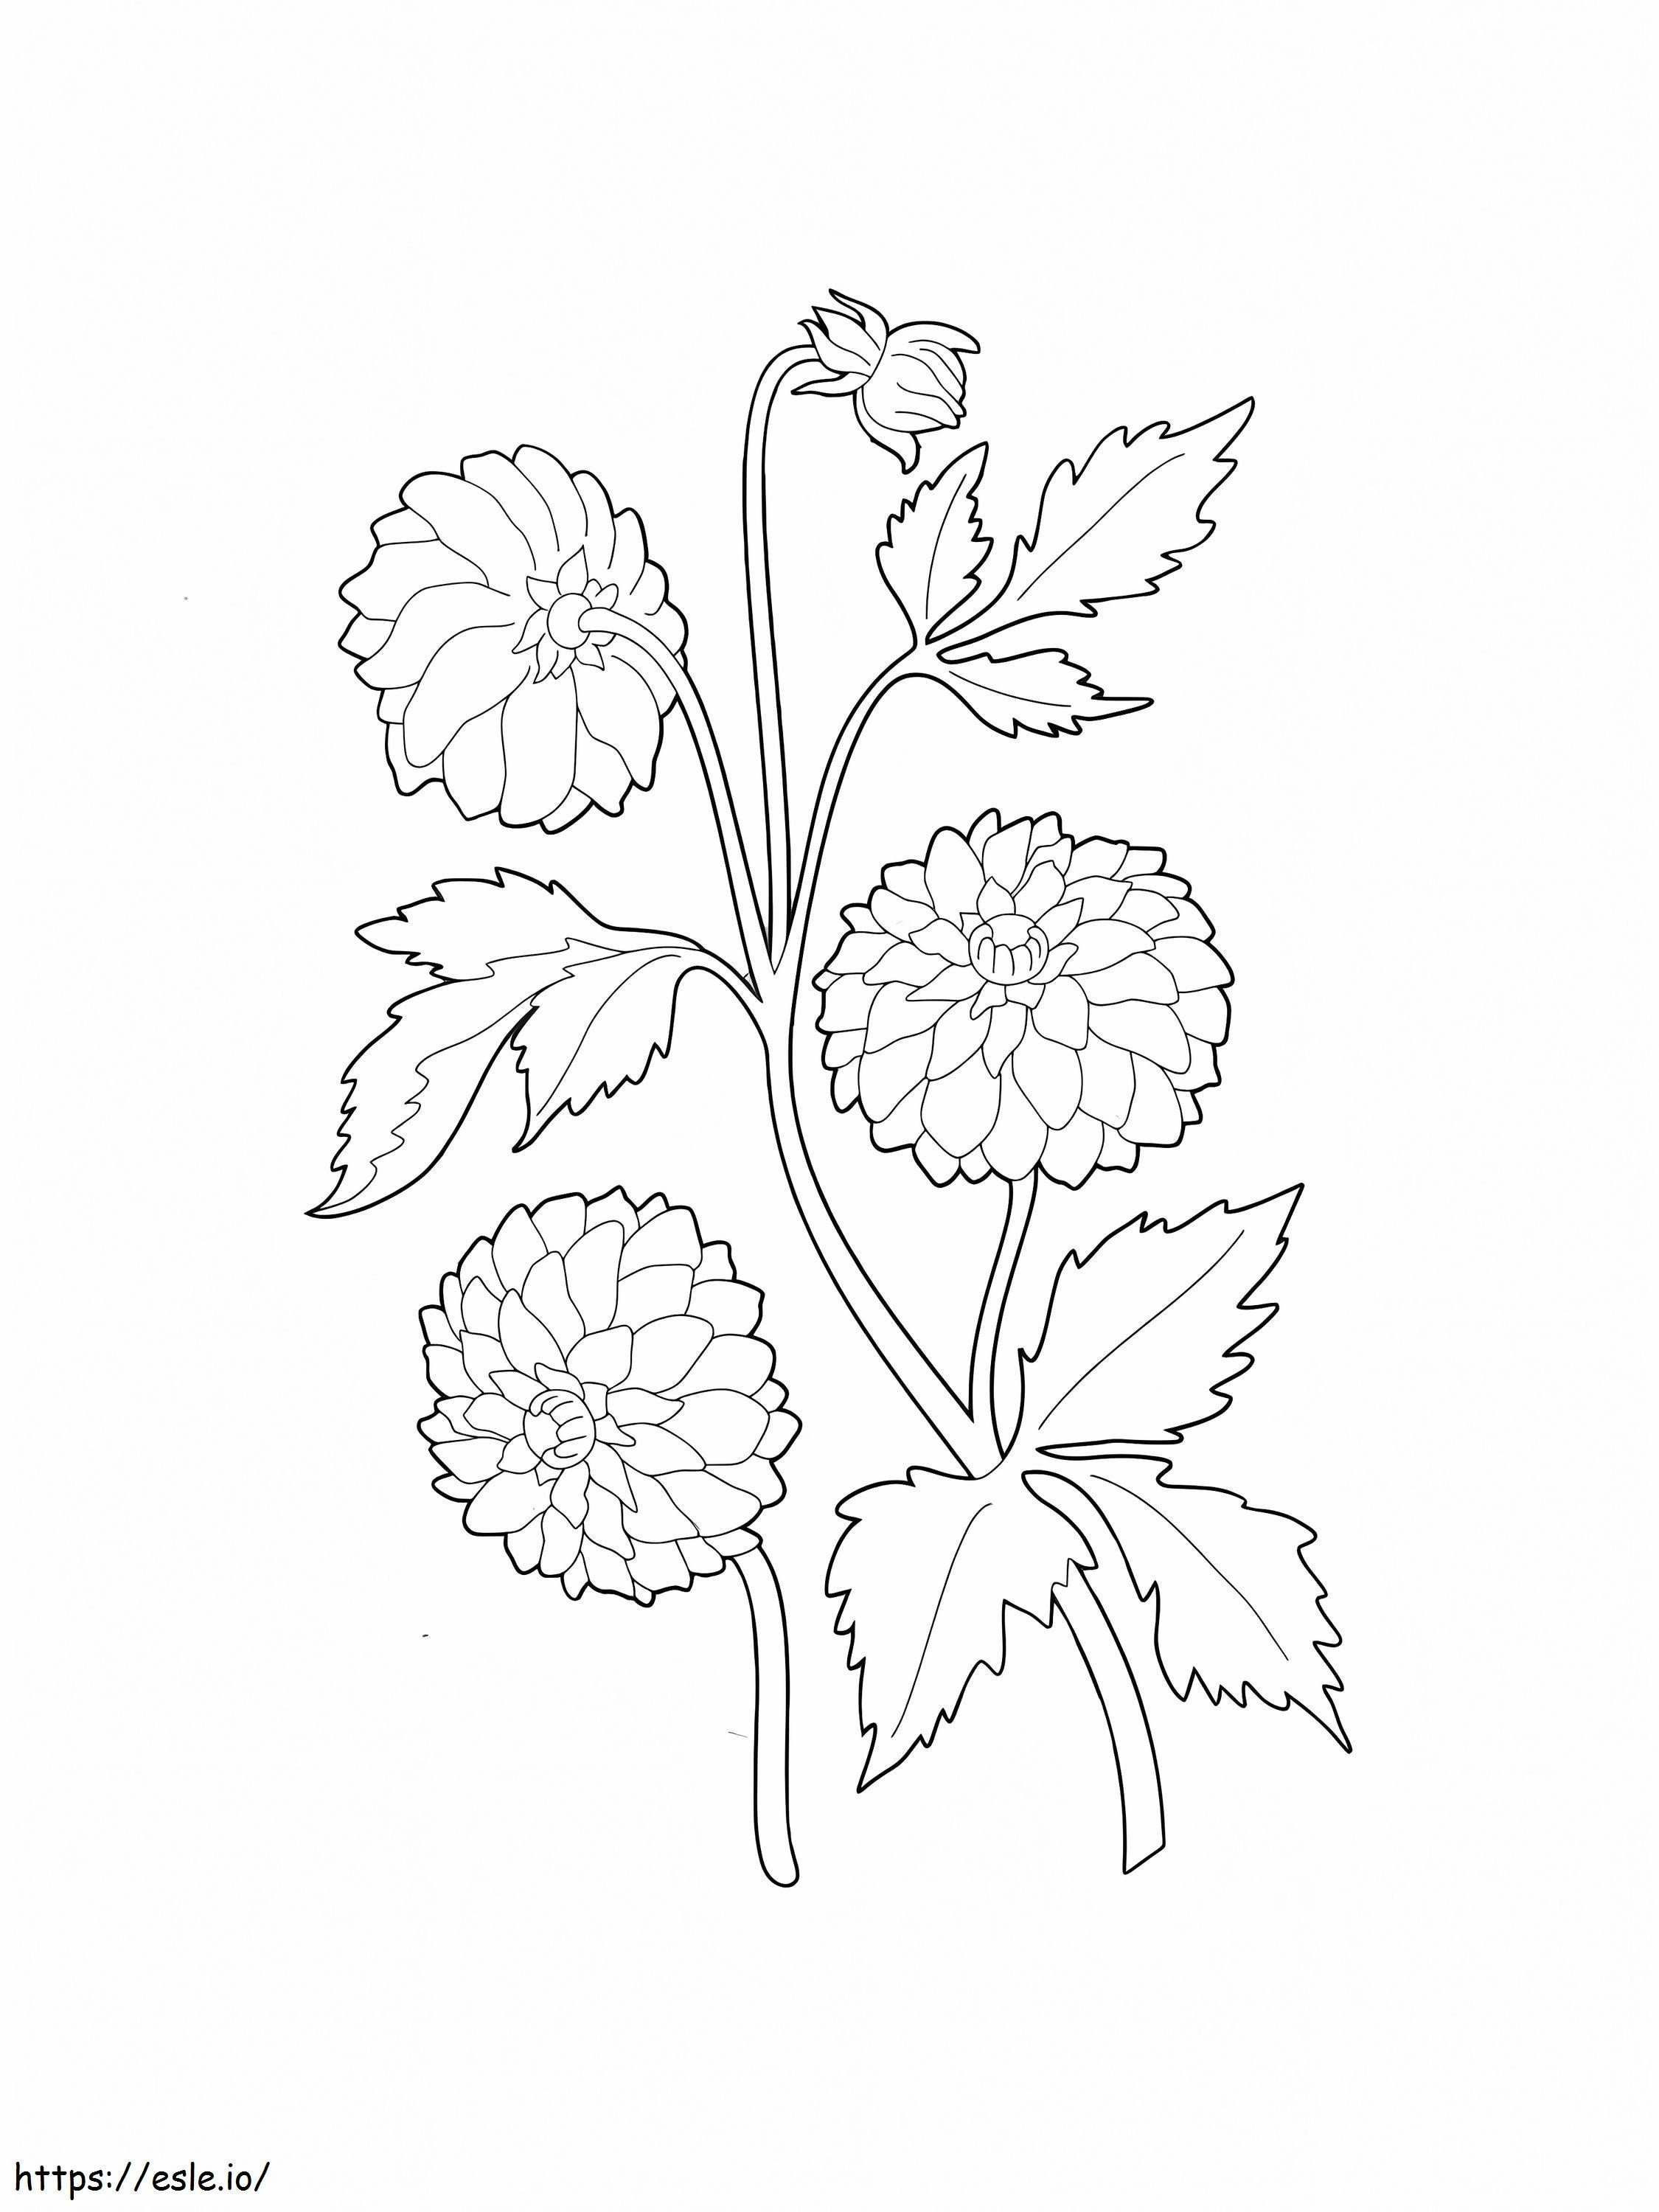 Free Printable Dahlia Flowers coloring page